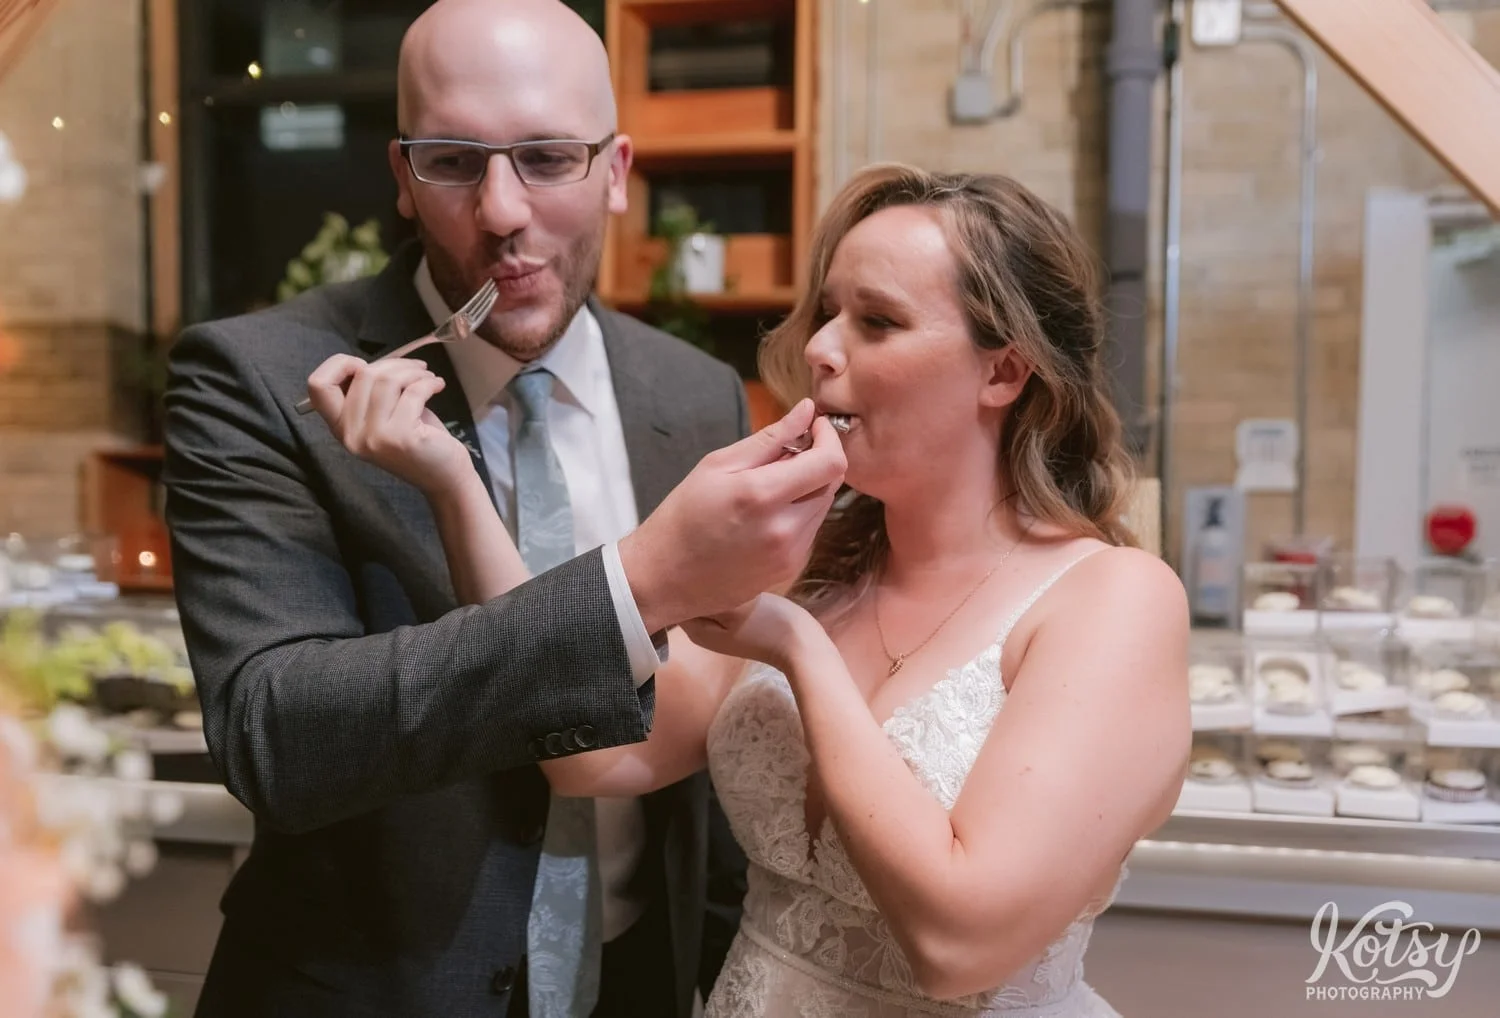 A bride in a white wedding gown and groom in gray suit feed each other a piece of cake during their Second Floor Events wedding reception in Toronto, Canada.